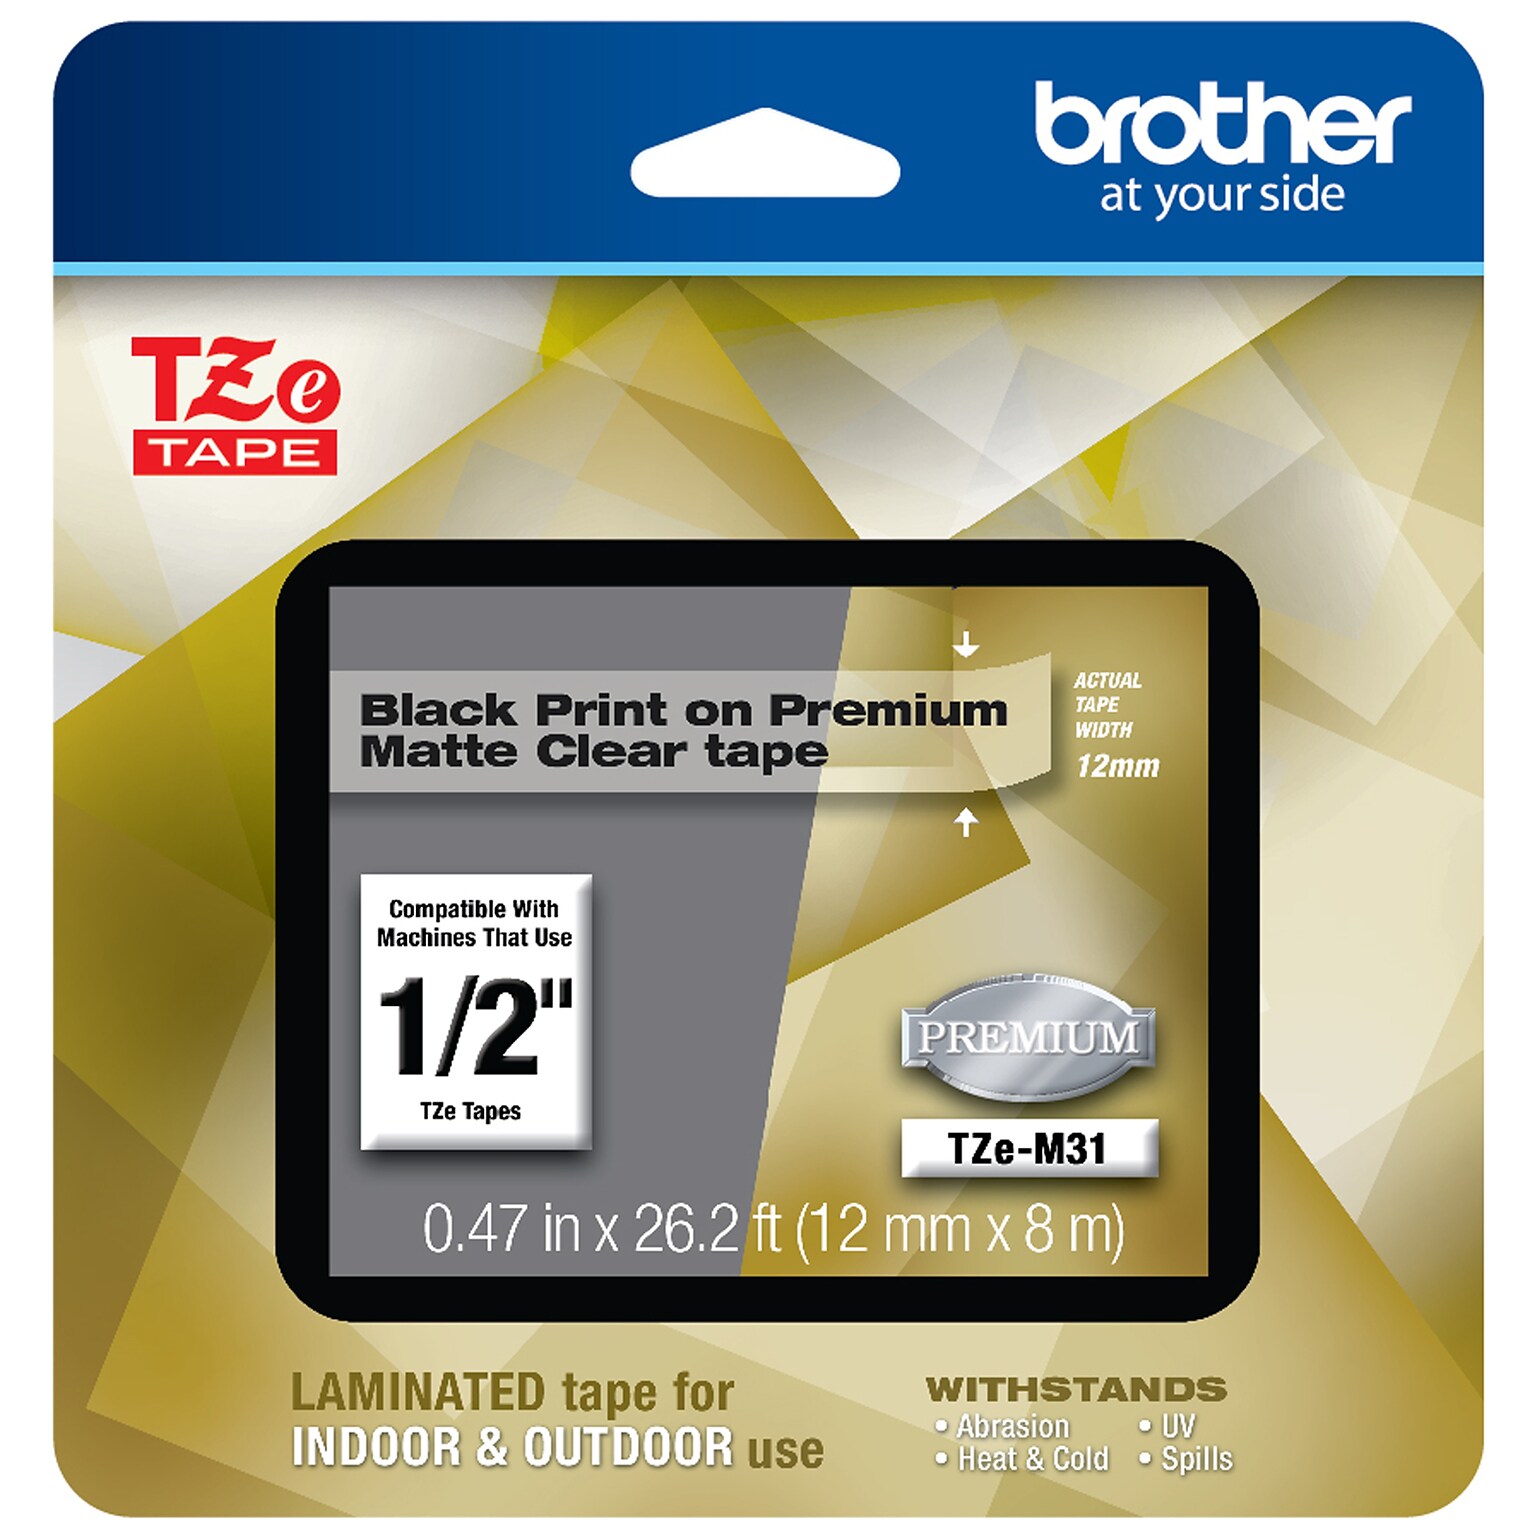 Brother P-touch TZe-M31 Laminated Premium Label Maker Tape, 1/2 x 26-2/10, Black on Matte Clear (TZe-M31)